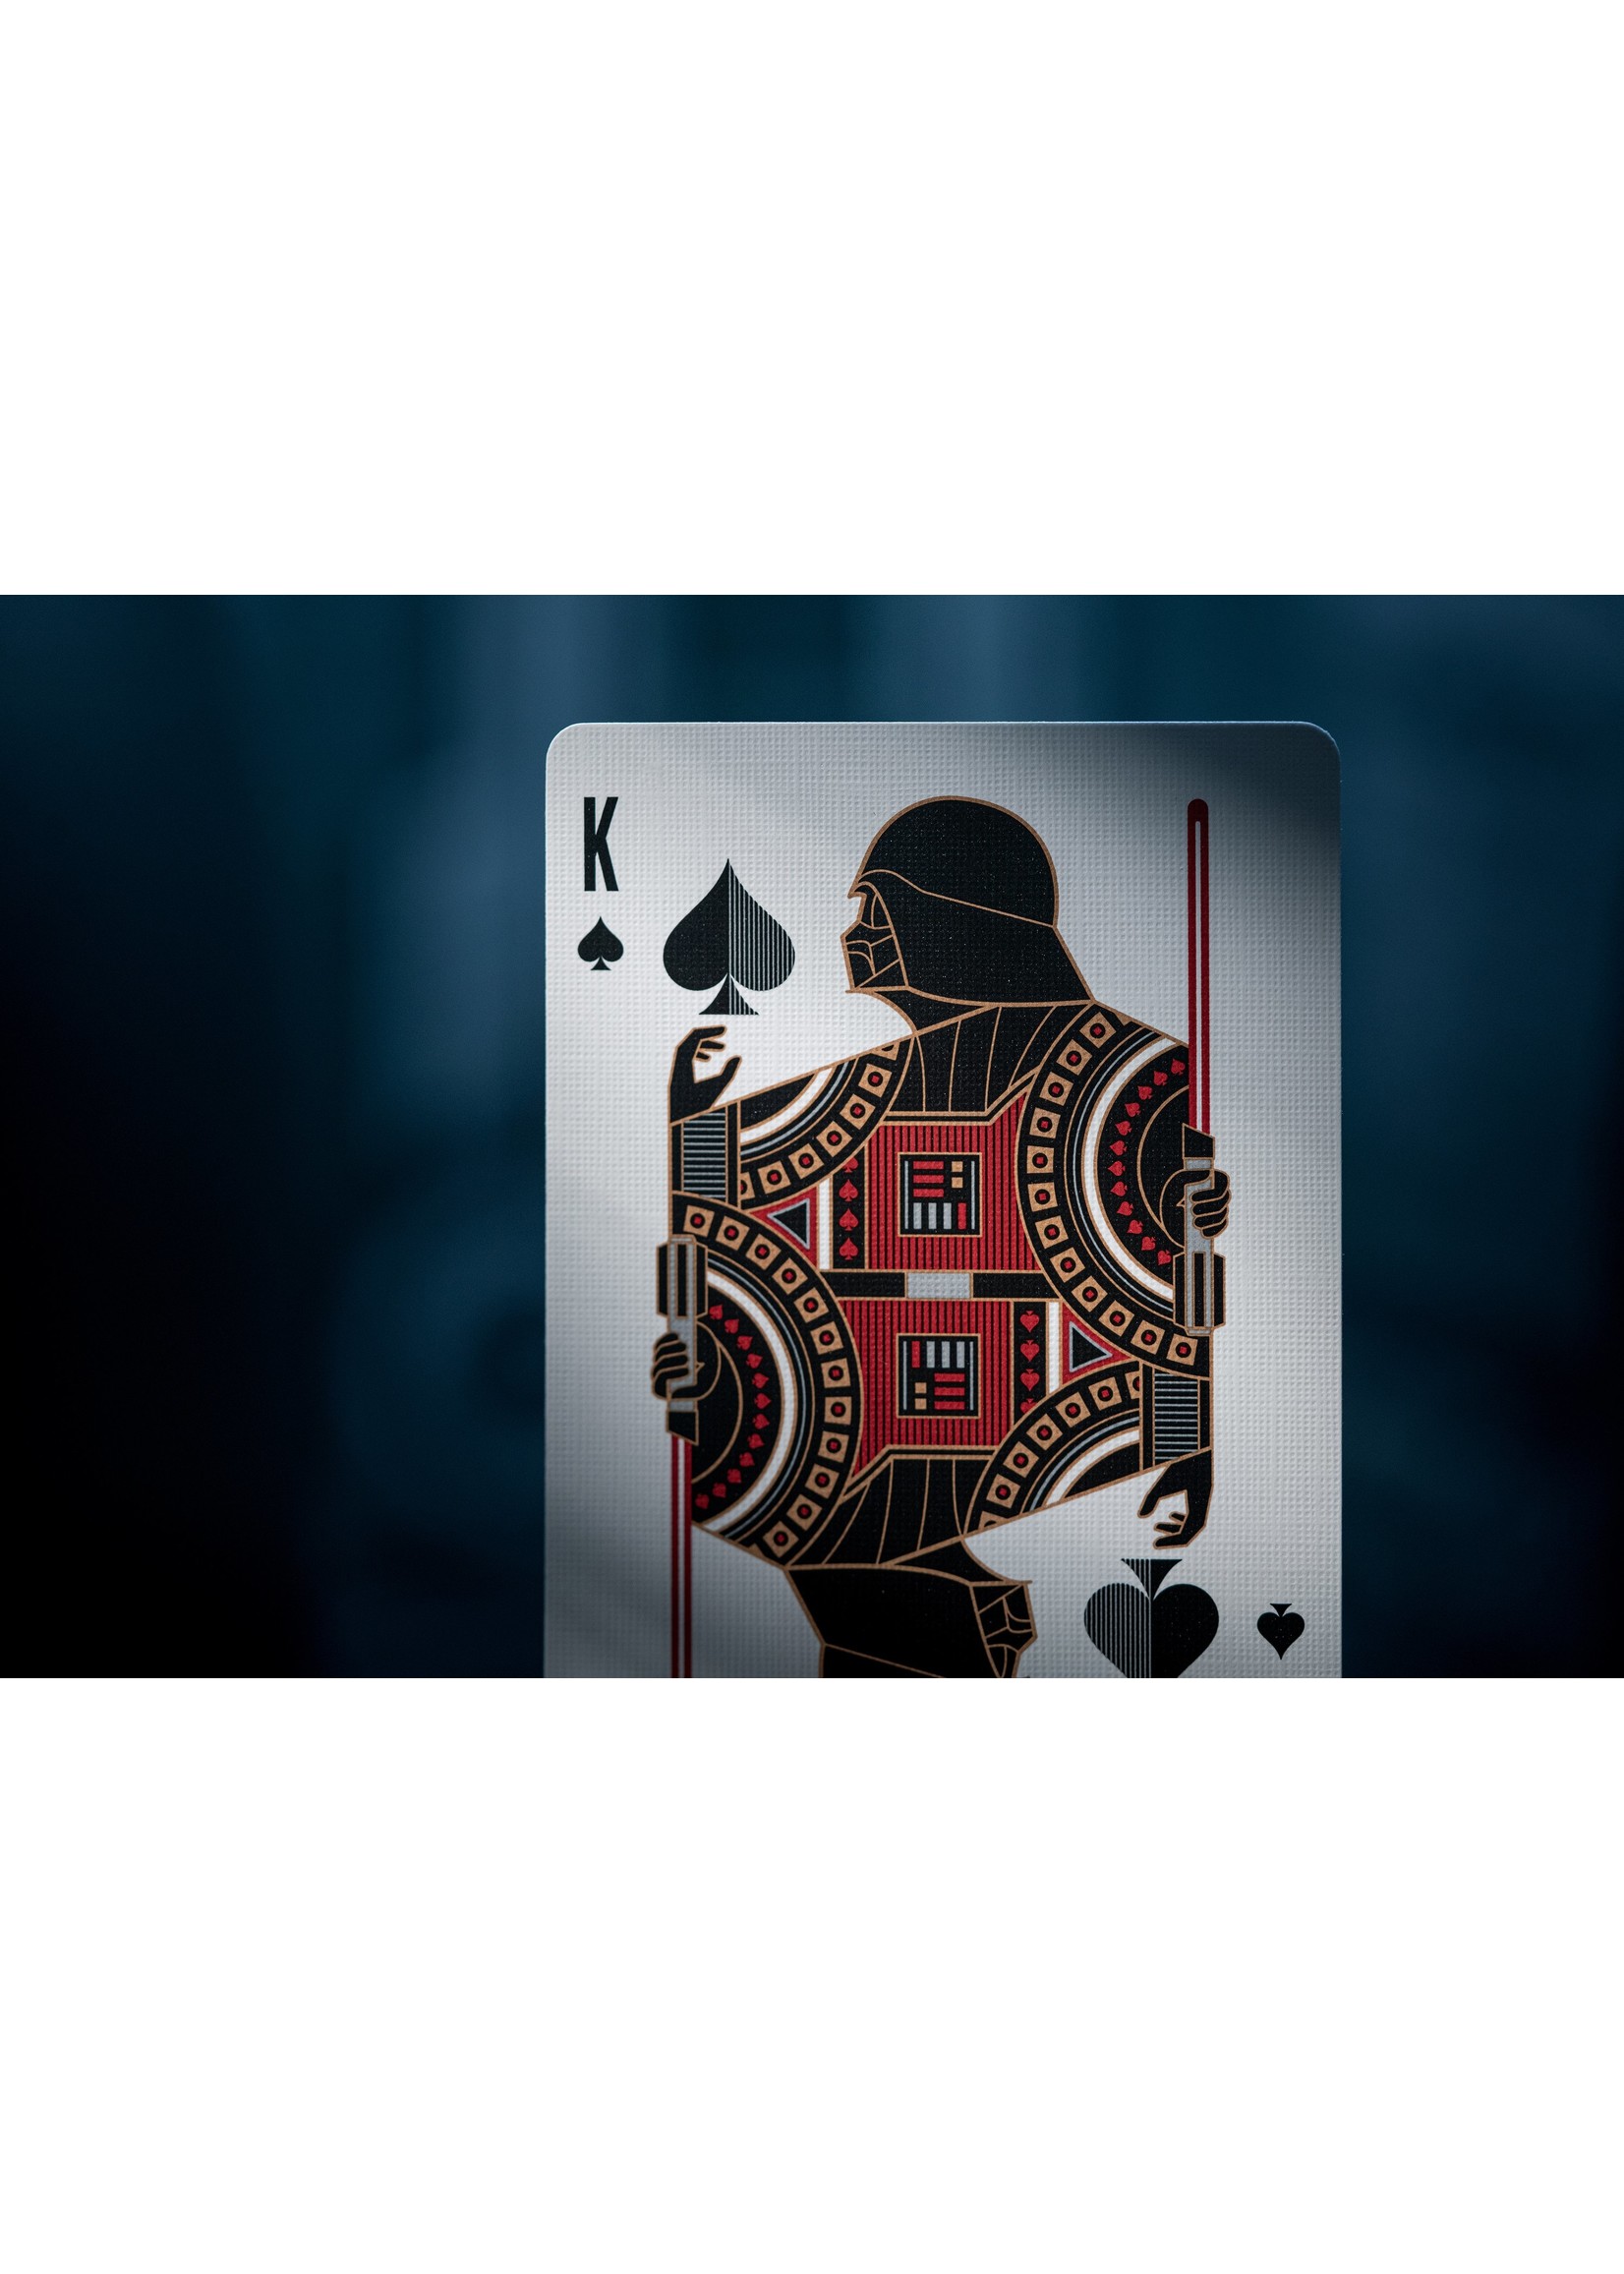 Theory11 Star Wars Dark Side Playing Cards